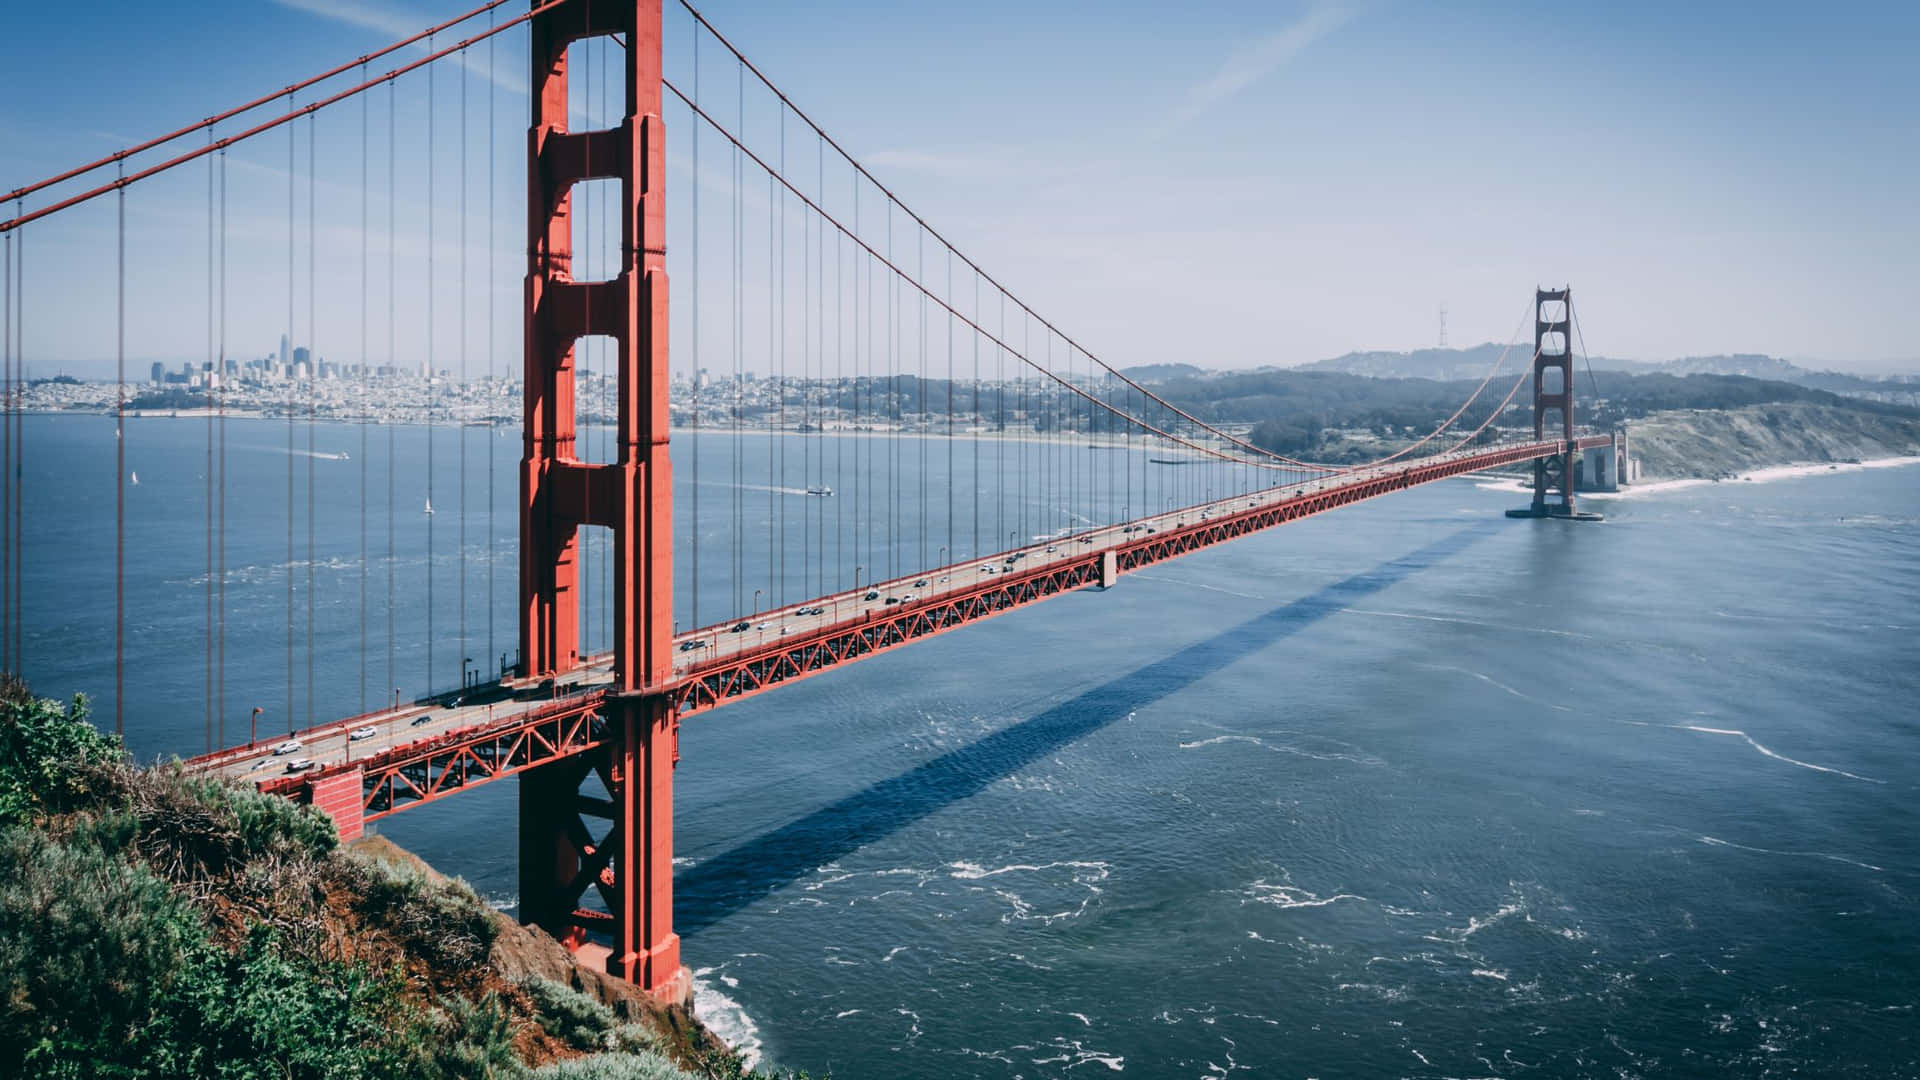 Enjoy the beauty of San Francisco, the City by the Bay!